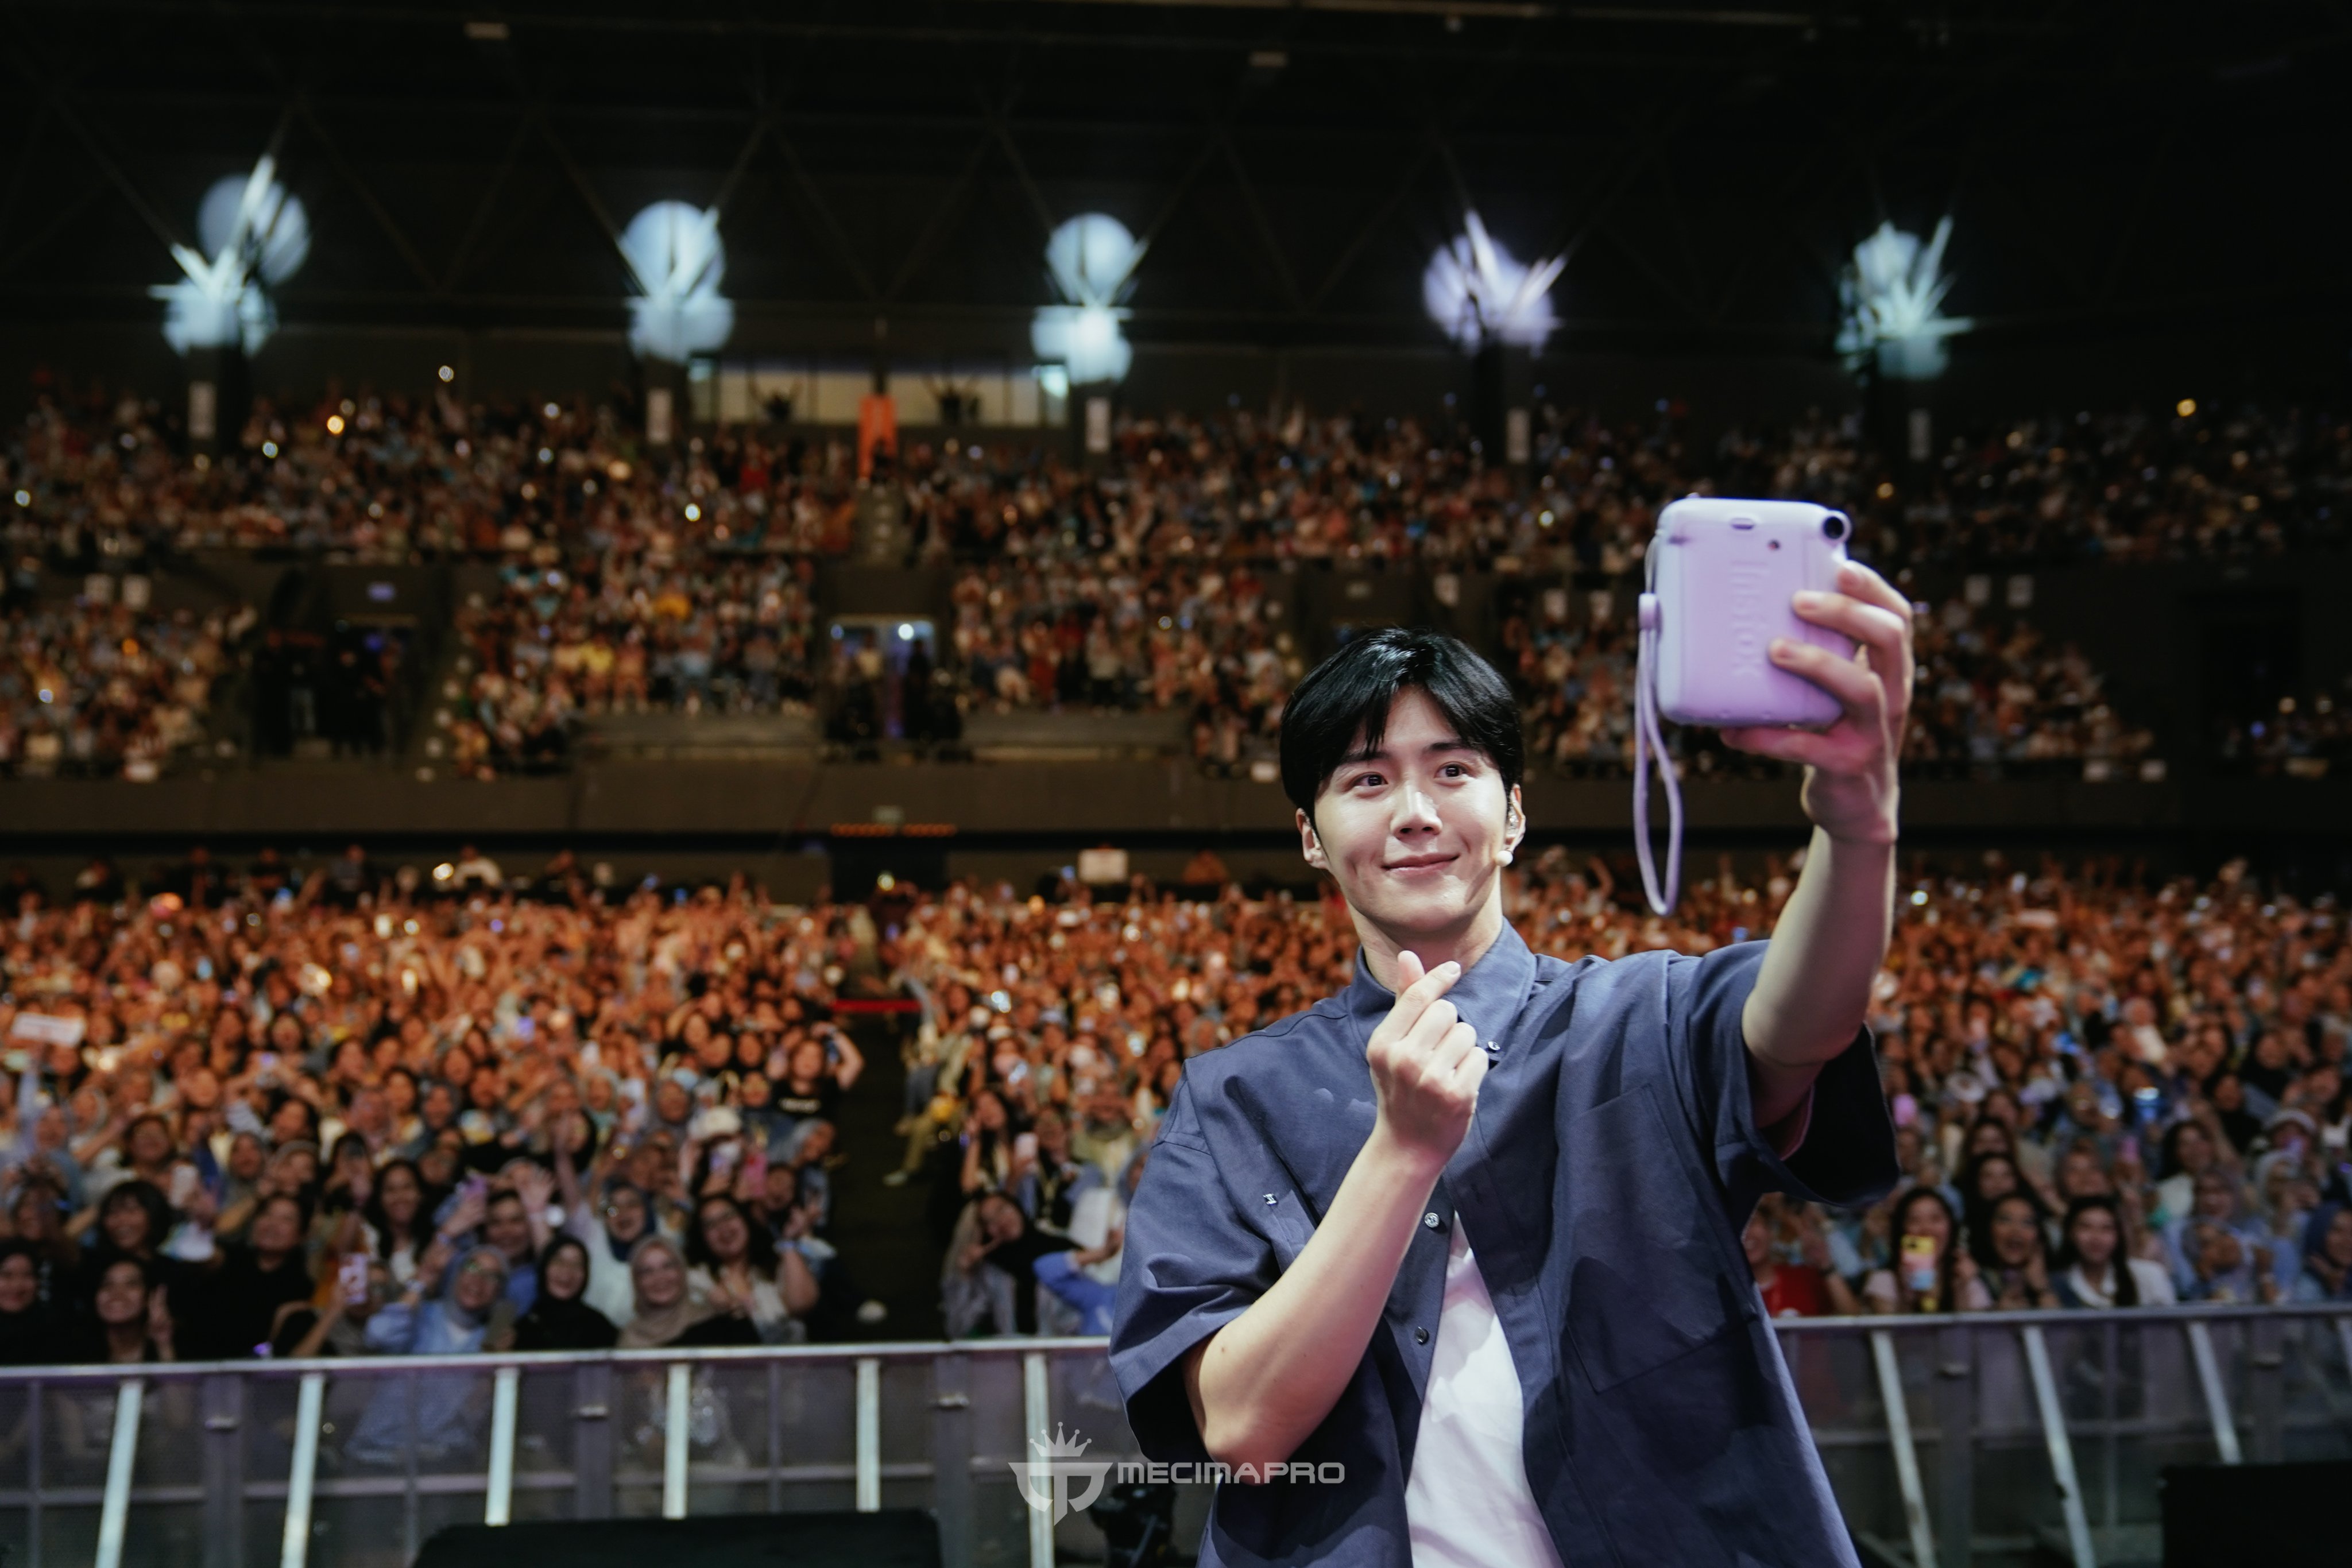 Park Bo Gum says the Time Spent Meeting Fans on his Asia Tour is Most  Rewarding for him